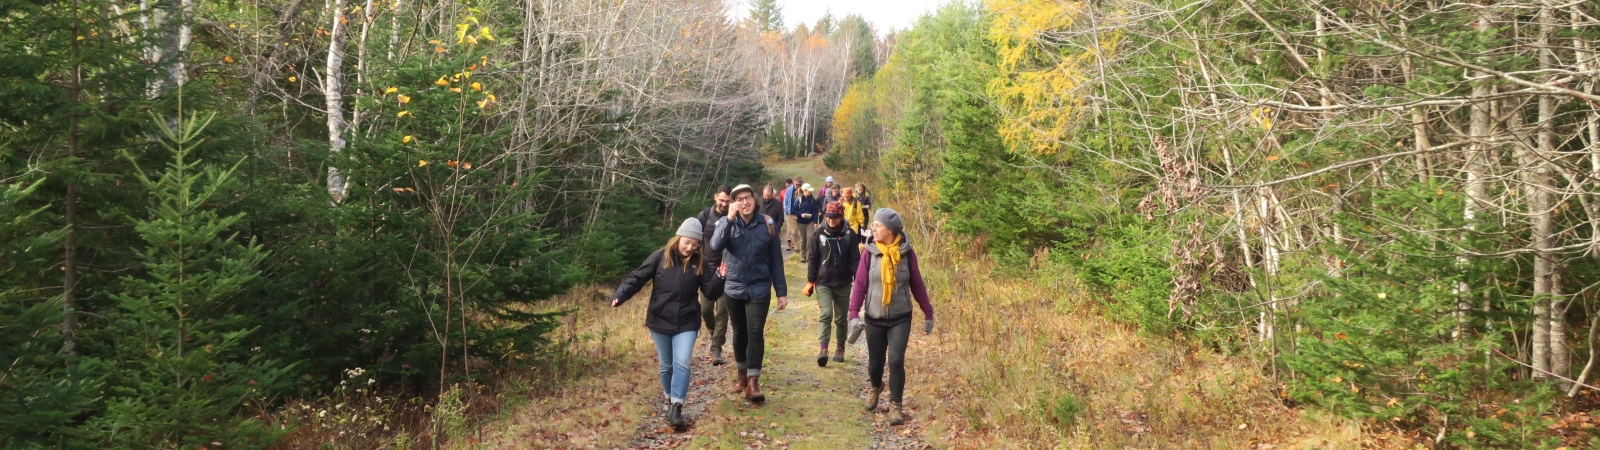 about a dozen people hiking on a wide trail in a forest in the fall